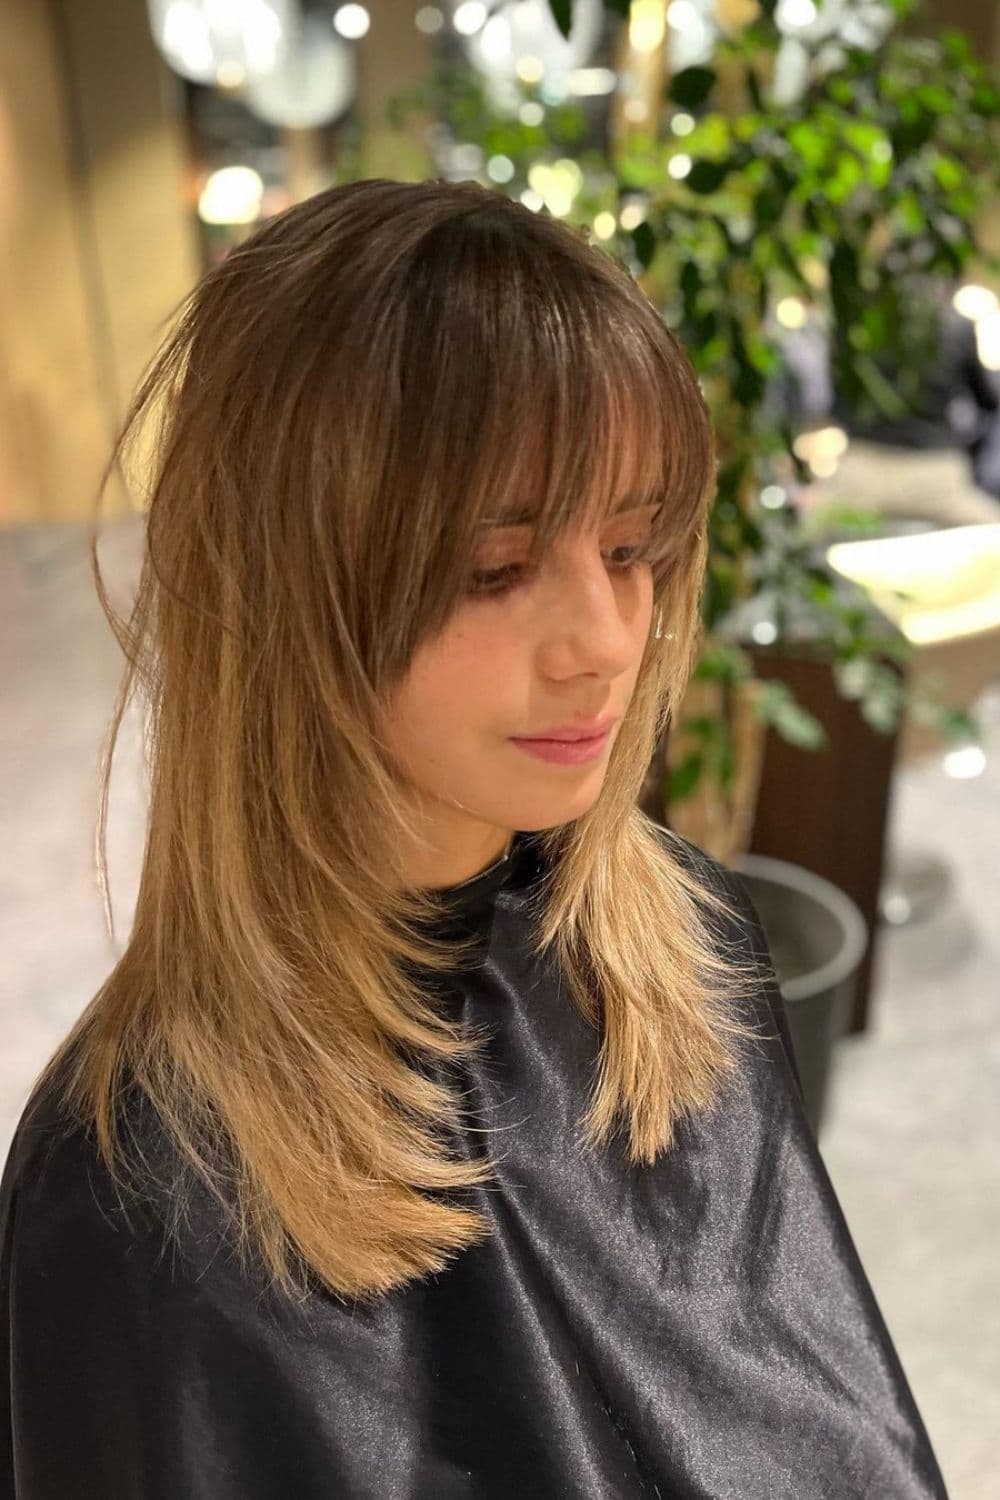 A woman sitting in a hair salon with a long, blonde front layers with classic bangs.